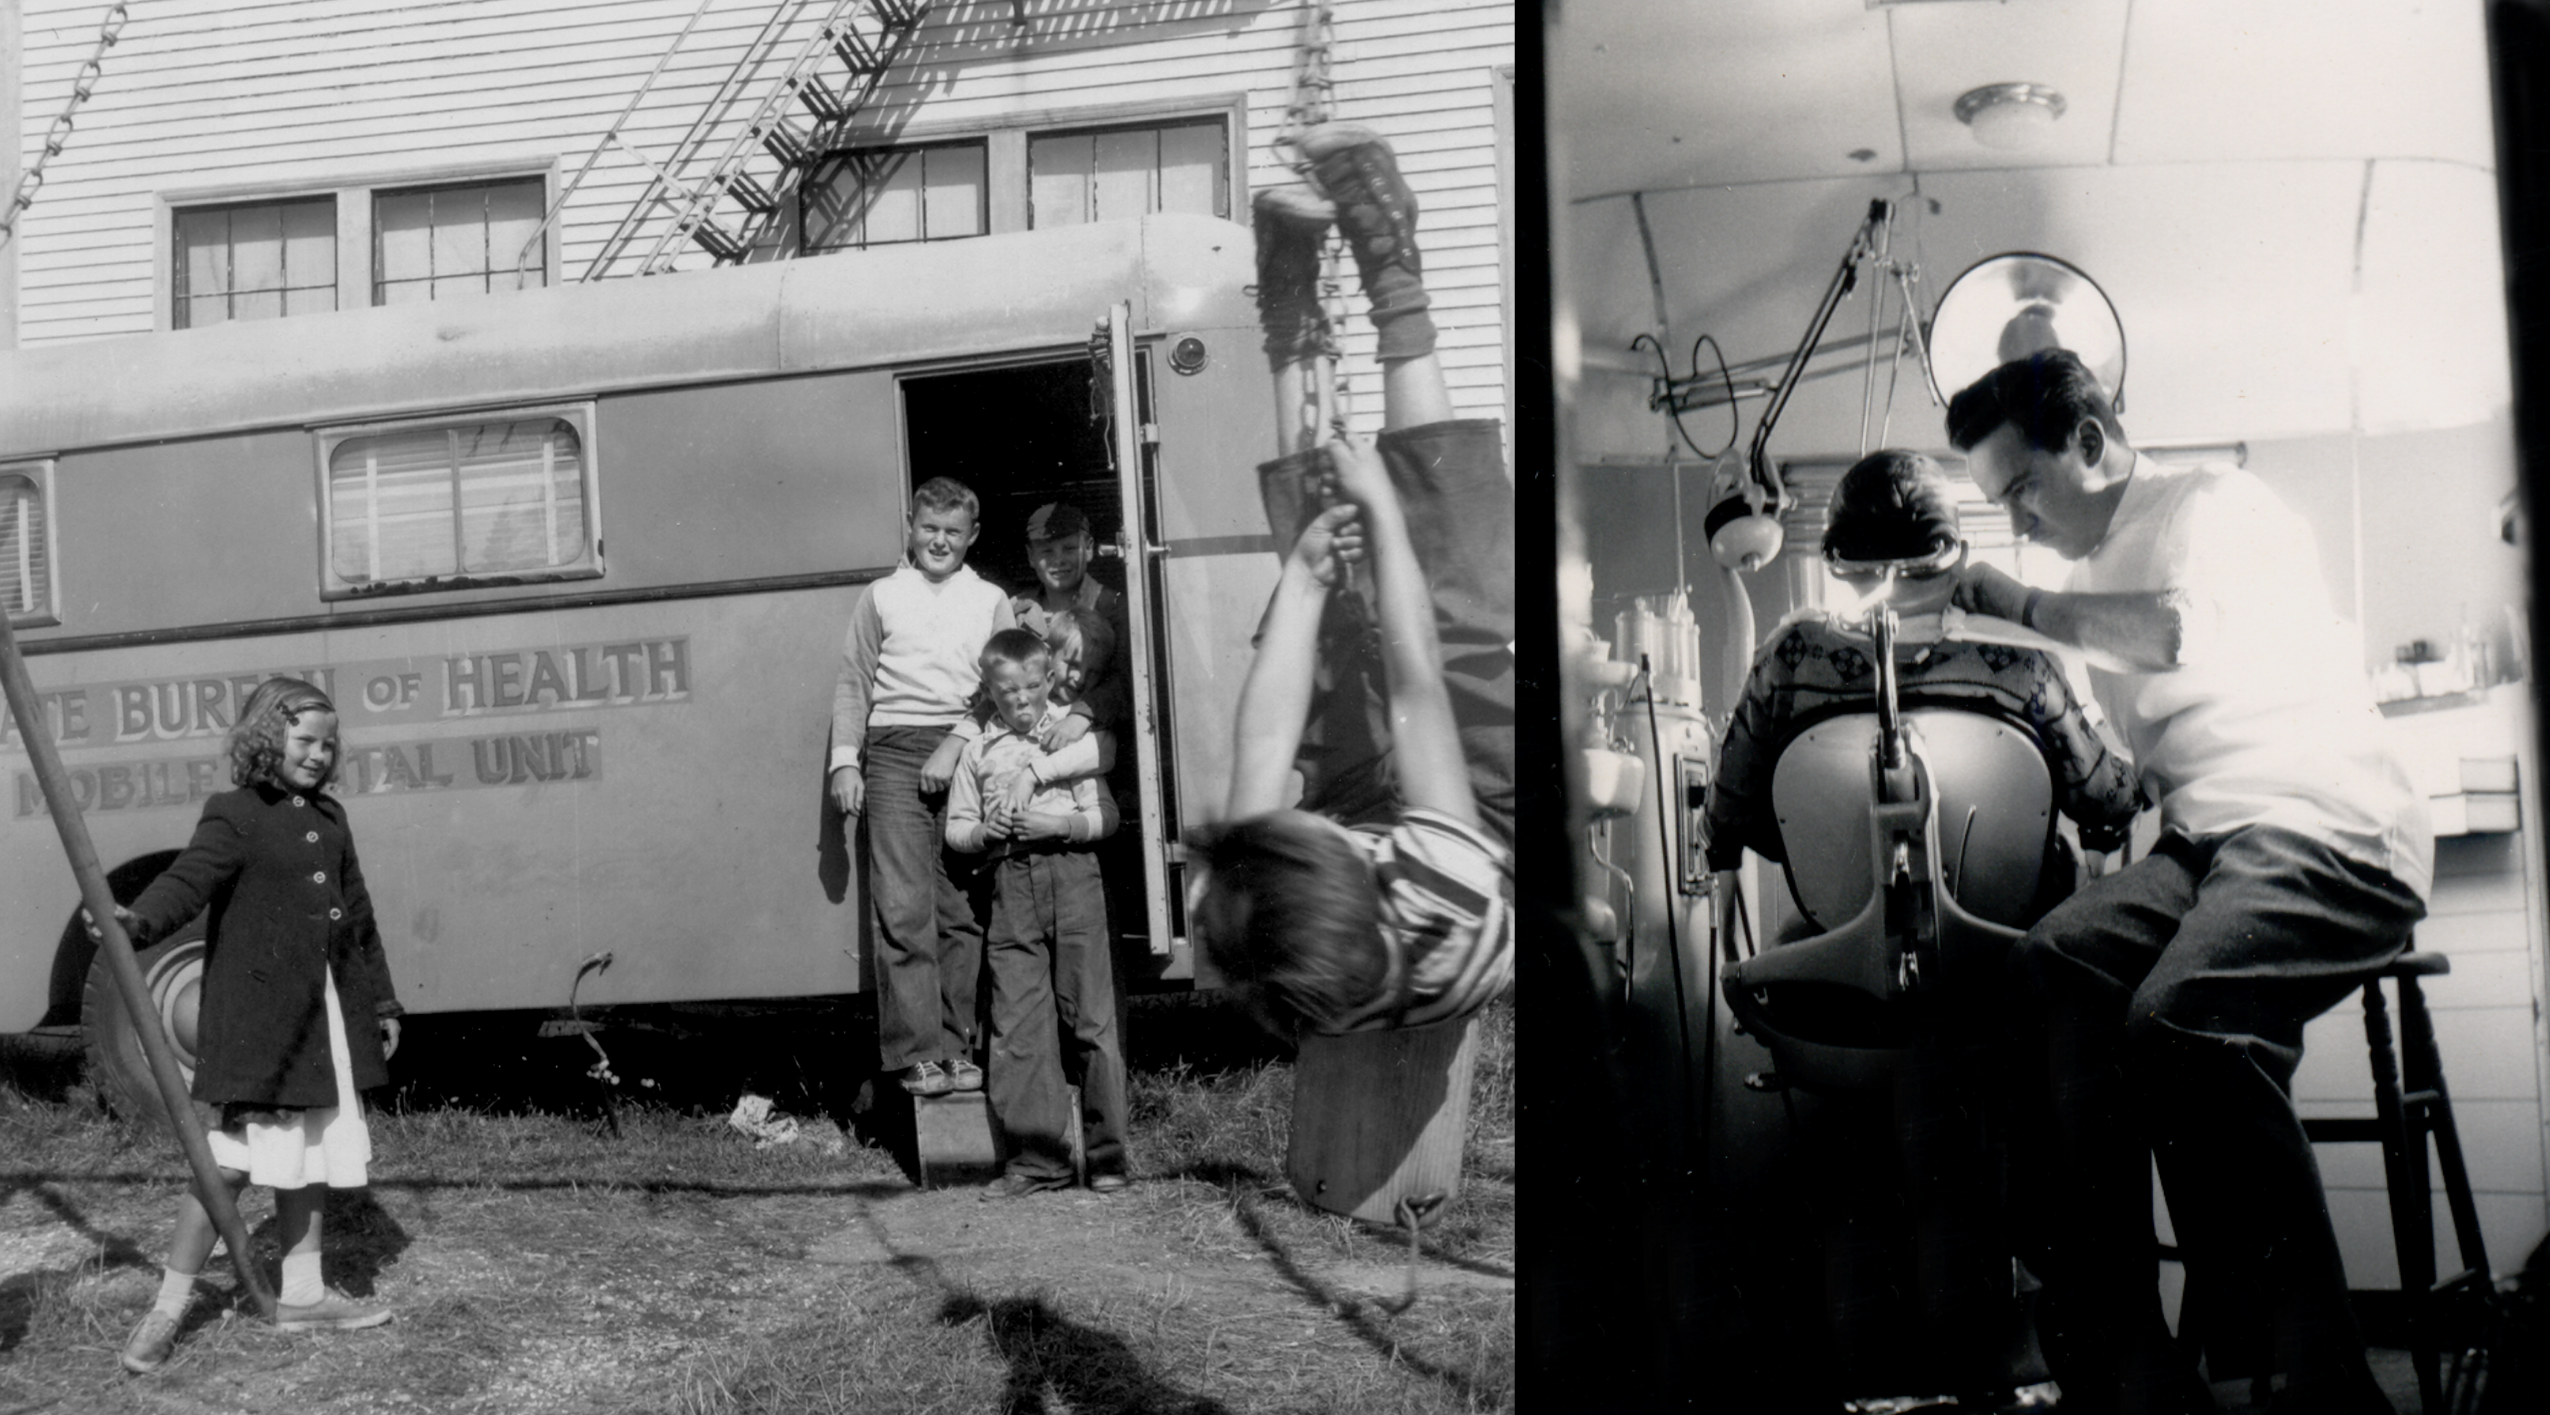 Two black and white photos. The first is of a bus that says "The Bureau of Health" with kids playing in front of it. The second is of a dentist 